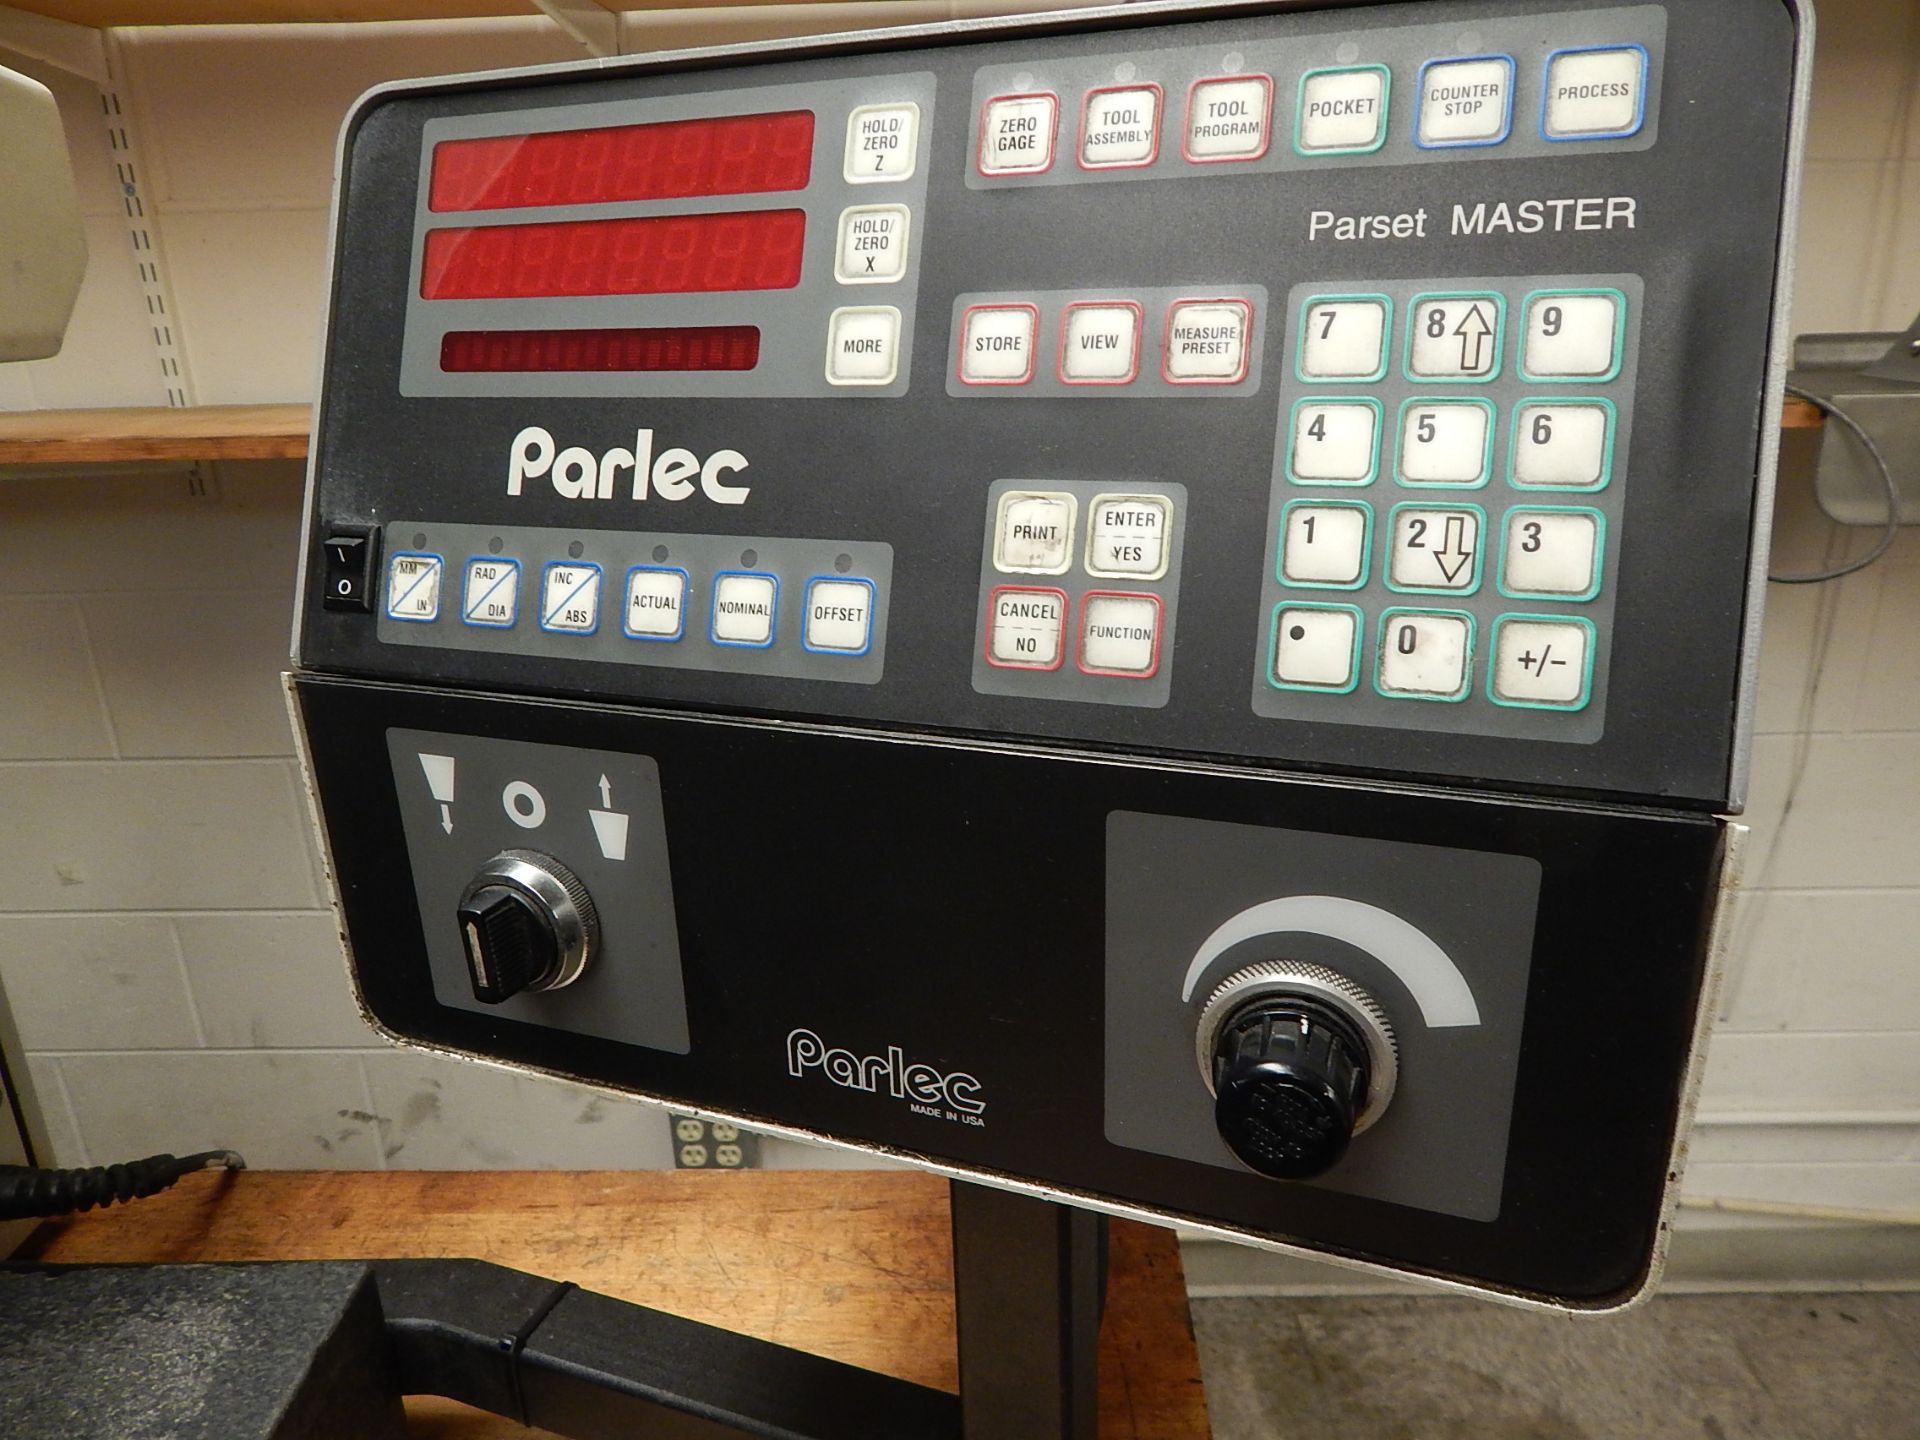 Parlec Model 240 Tool Setter, s/n 115257-0296, with Parlec Parset Master Control - Image 2 of 5